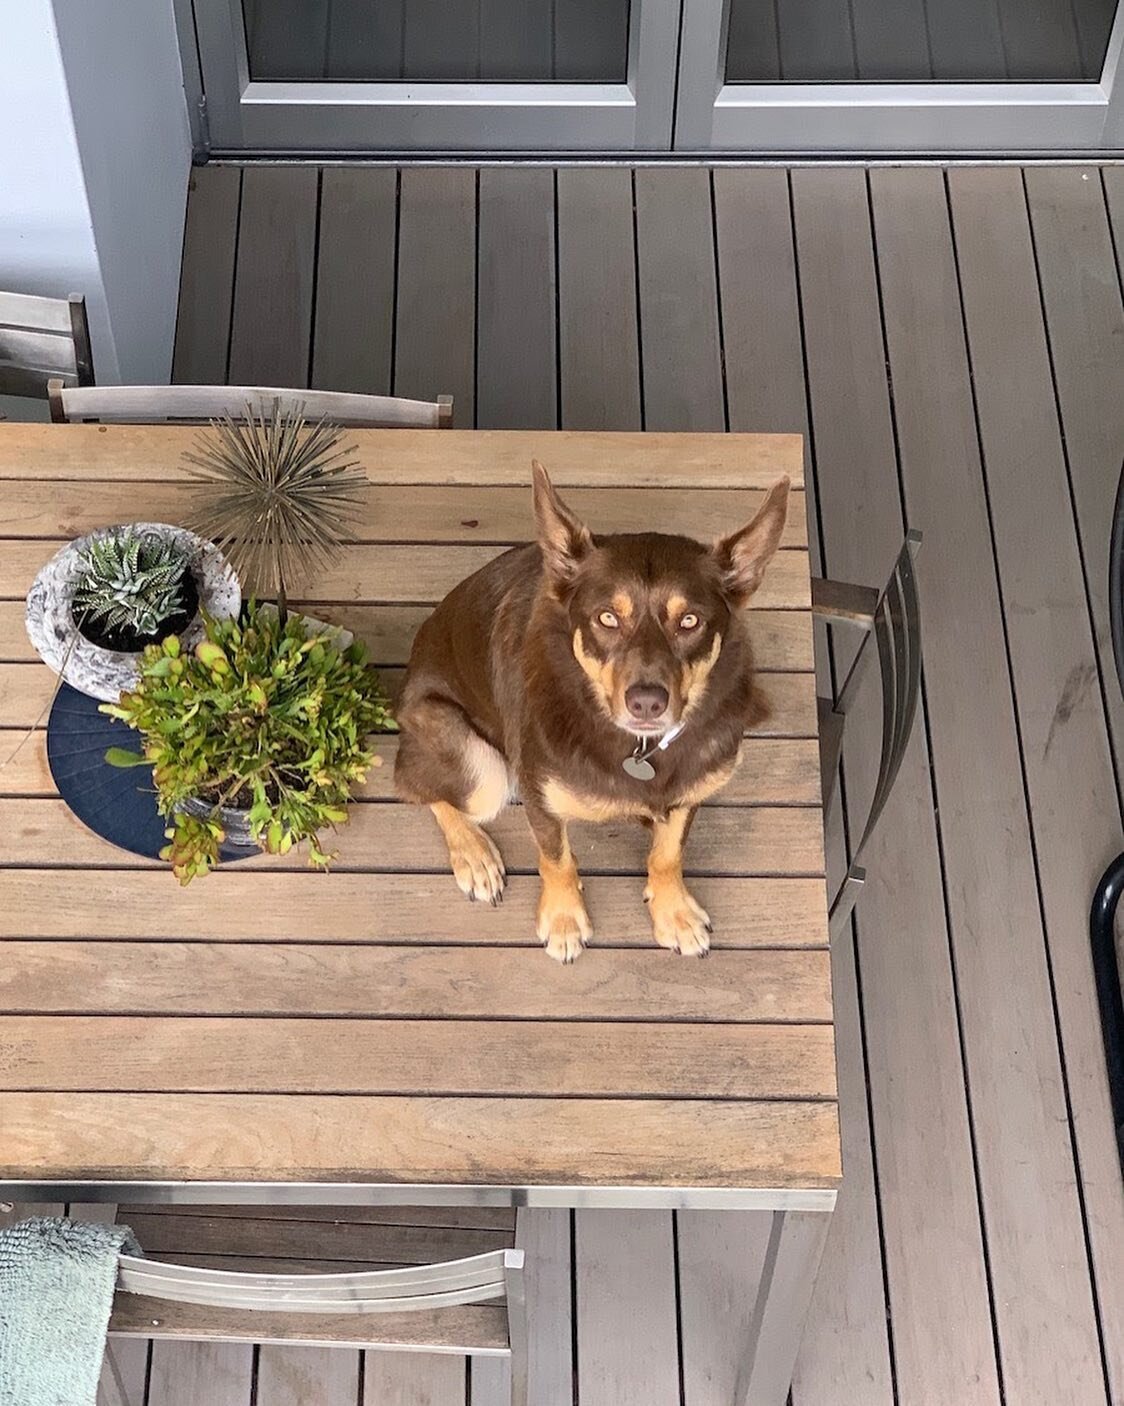 Site dog Archie is at it again 🐶
⠀⠀⠀⠀⠀⠀⠀⠀ ⠀⠀⠀⠀⠀⠀
As one of our most loyal Lux employees, Archie is always keen to help out on any job. Even if it involves trying to make his way onto the roof via the table to check on his workmates.